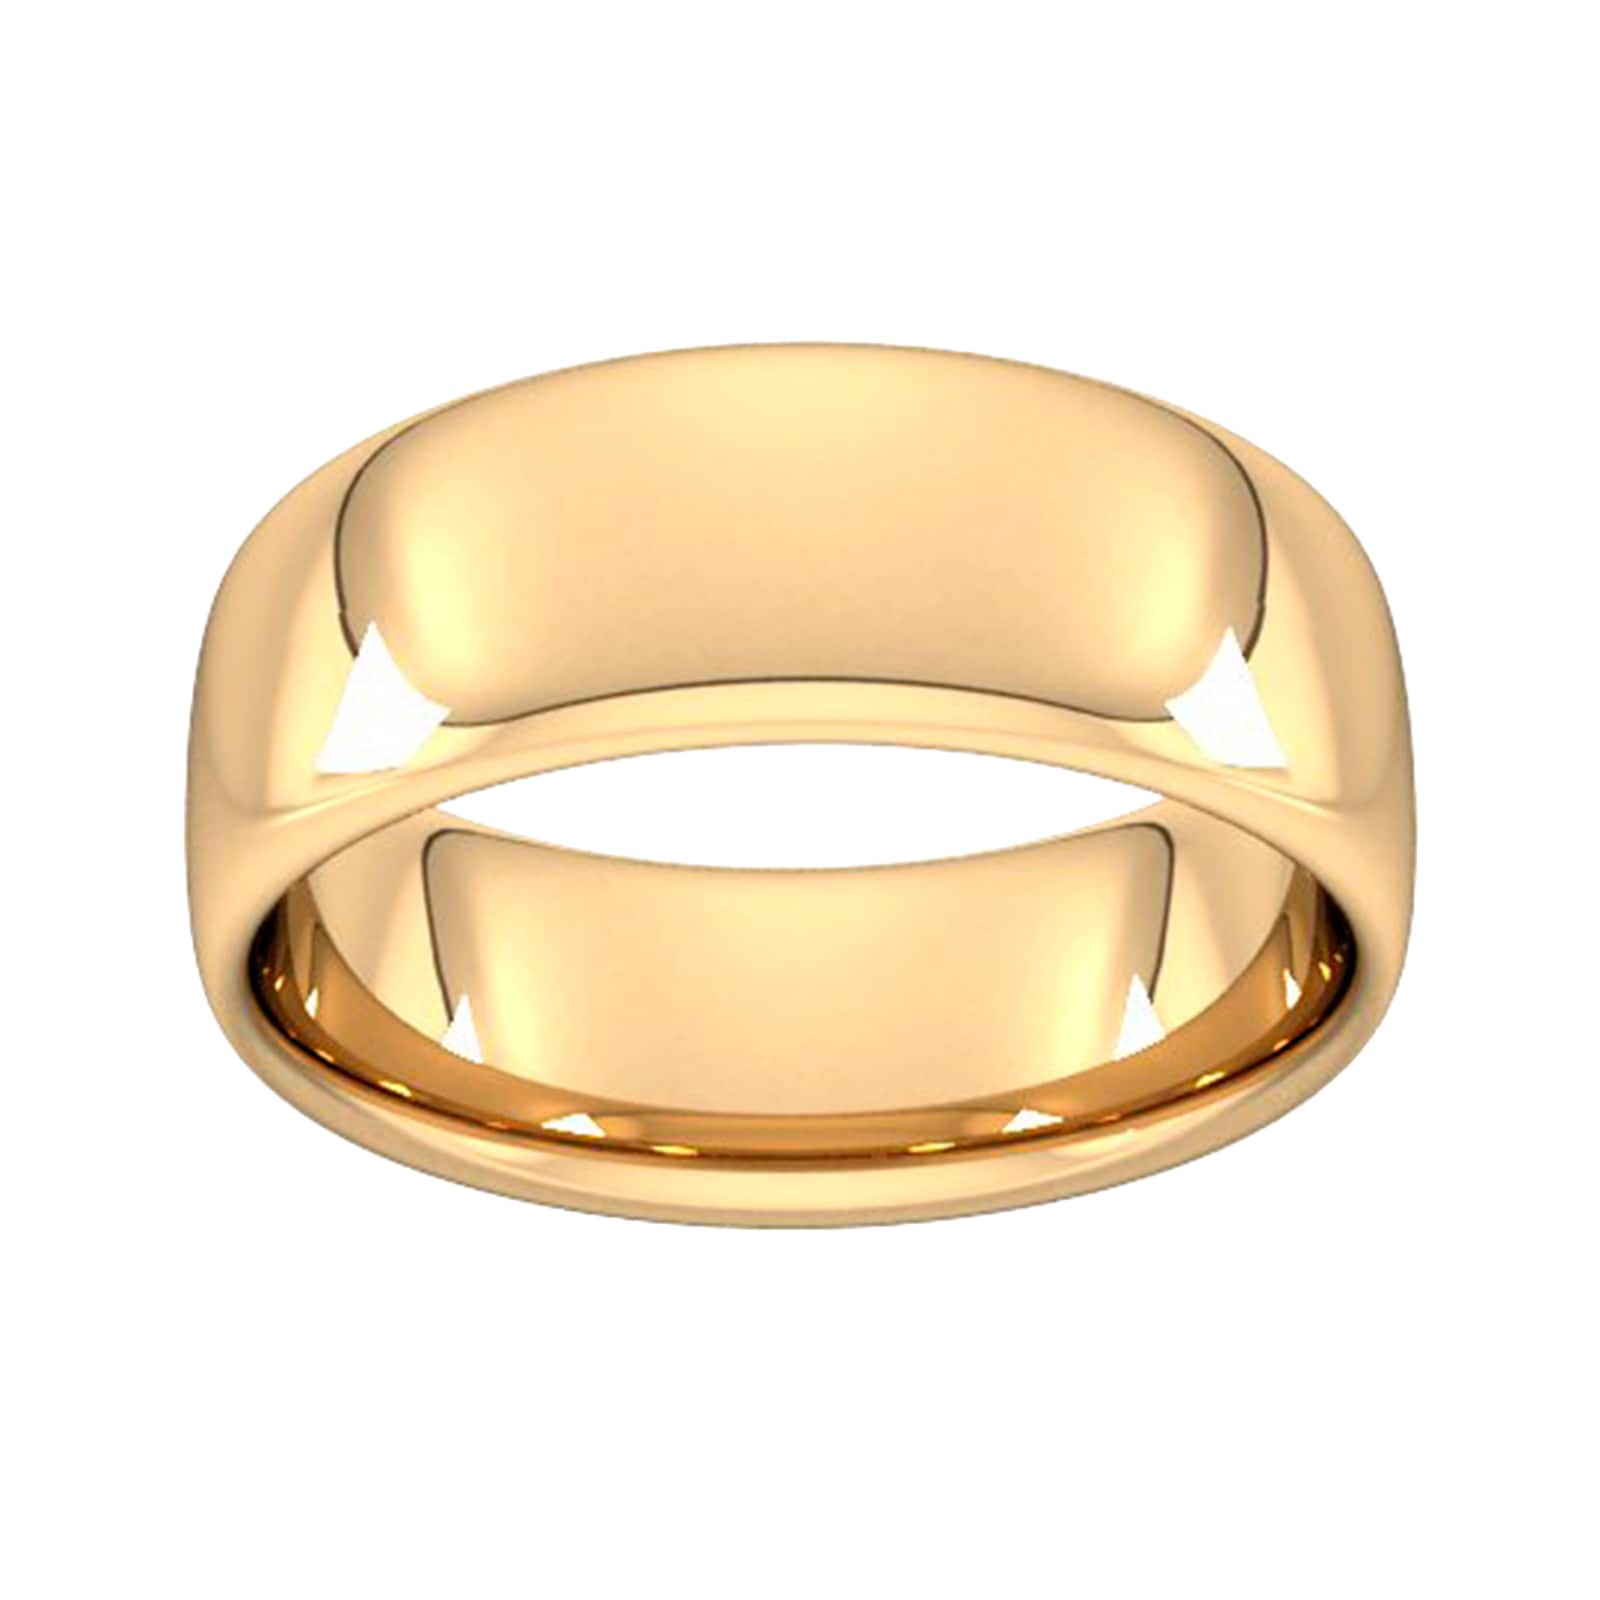 8mm Slight Court Heavy Wedding Ring In 18 Carat Yellow Gold - Ring Size T